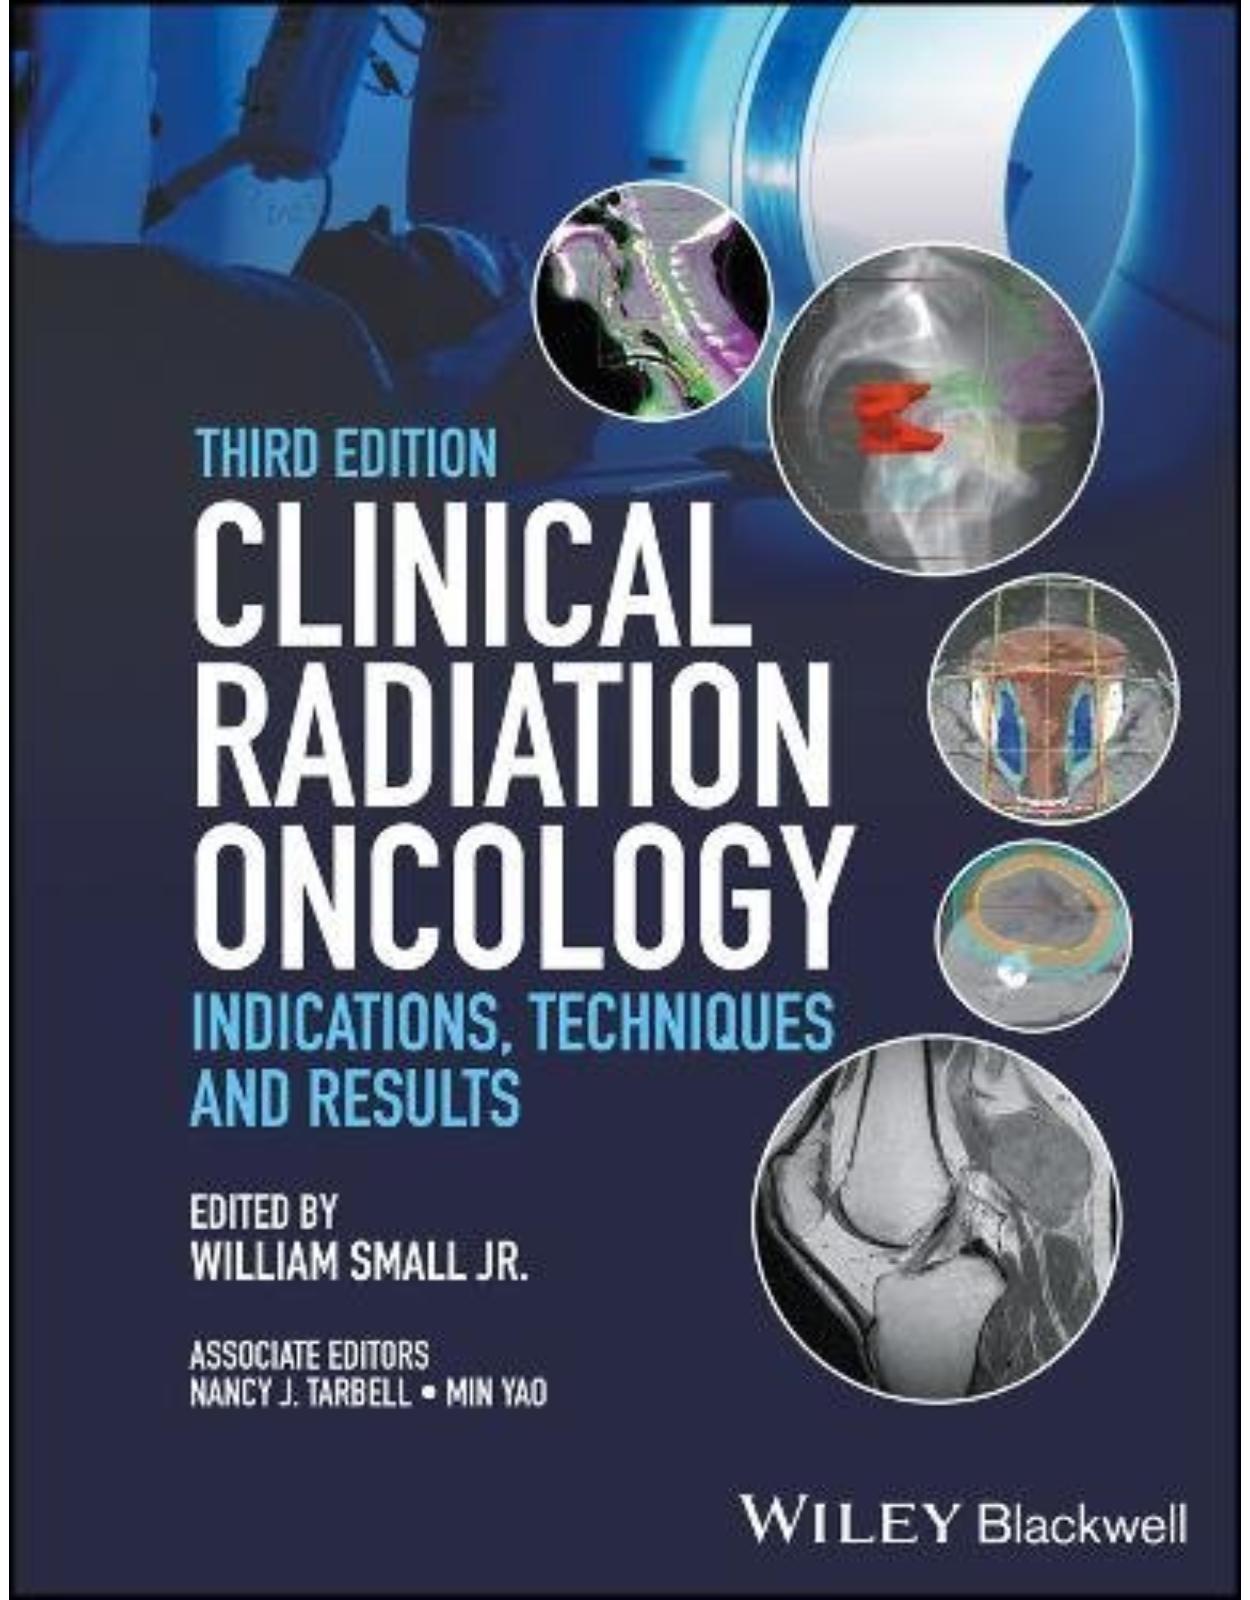 Clinical Radiation Oncology: Indications, Techniques, and Results, 3rd Edition